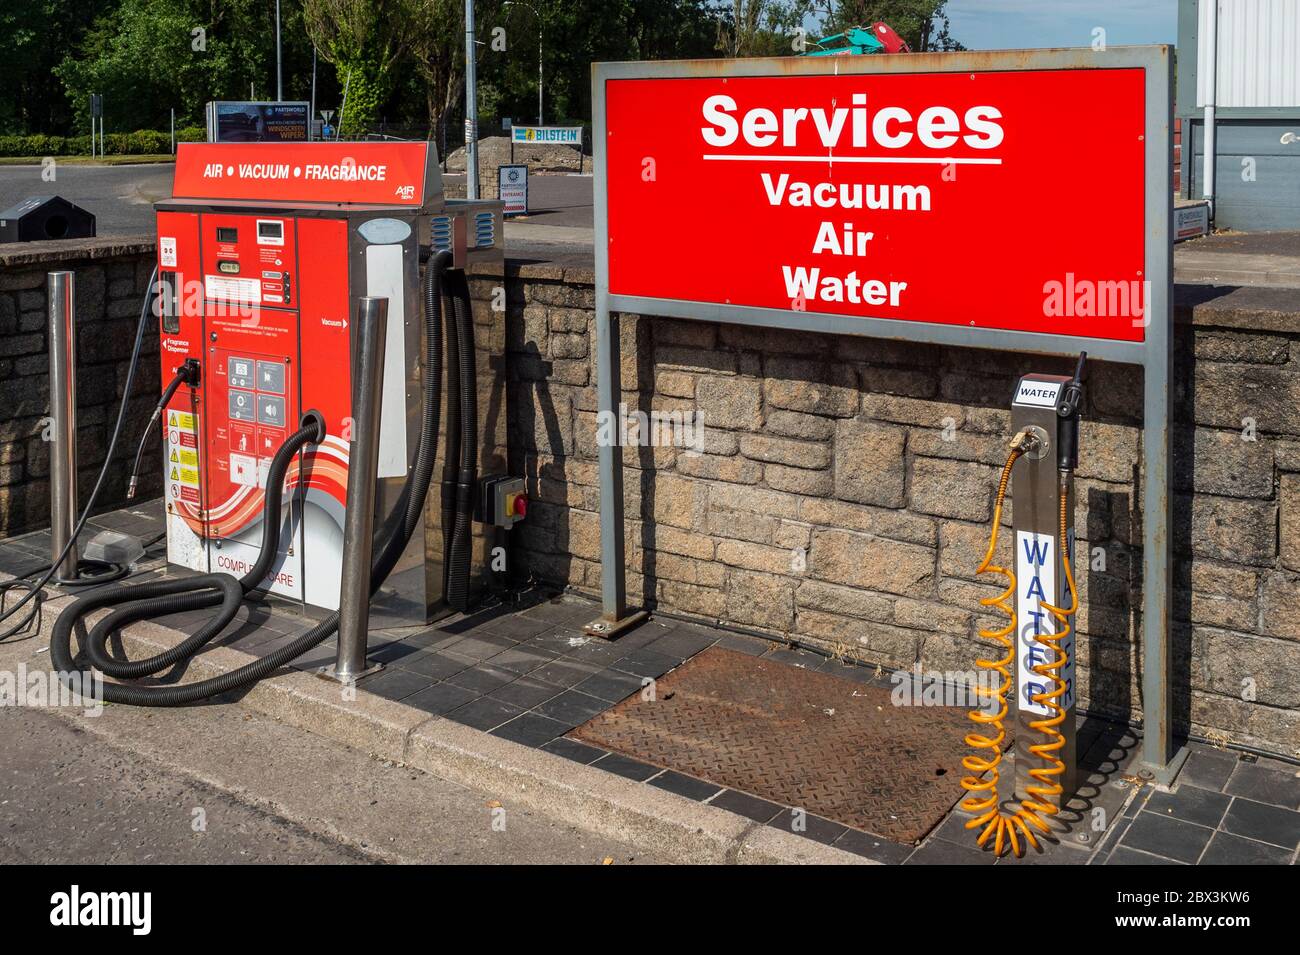 Services at a Garage in Bandon, West Cork, Ireland. Stock Photo